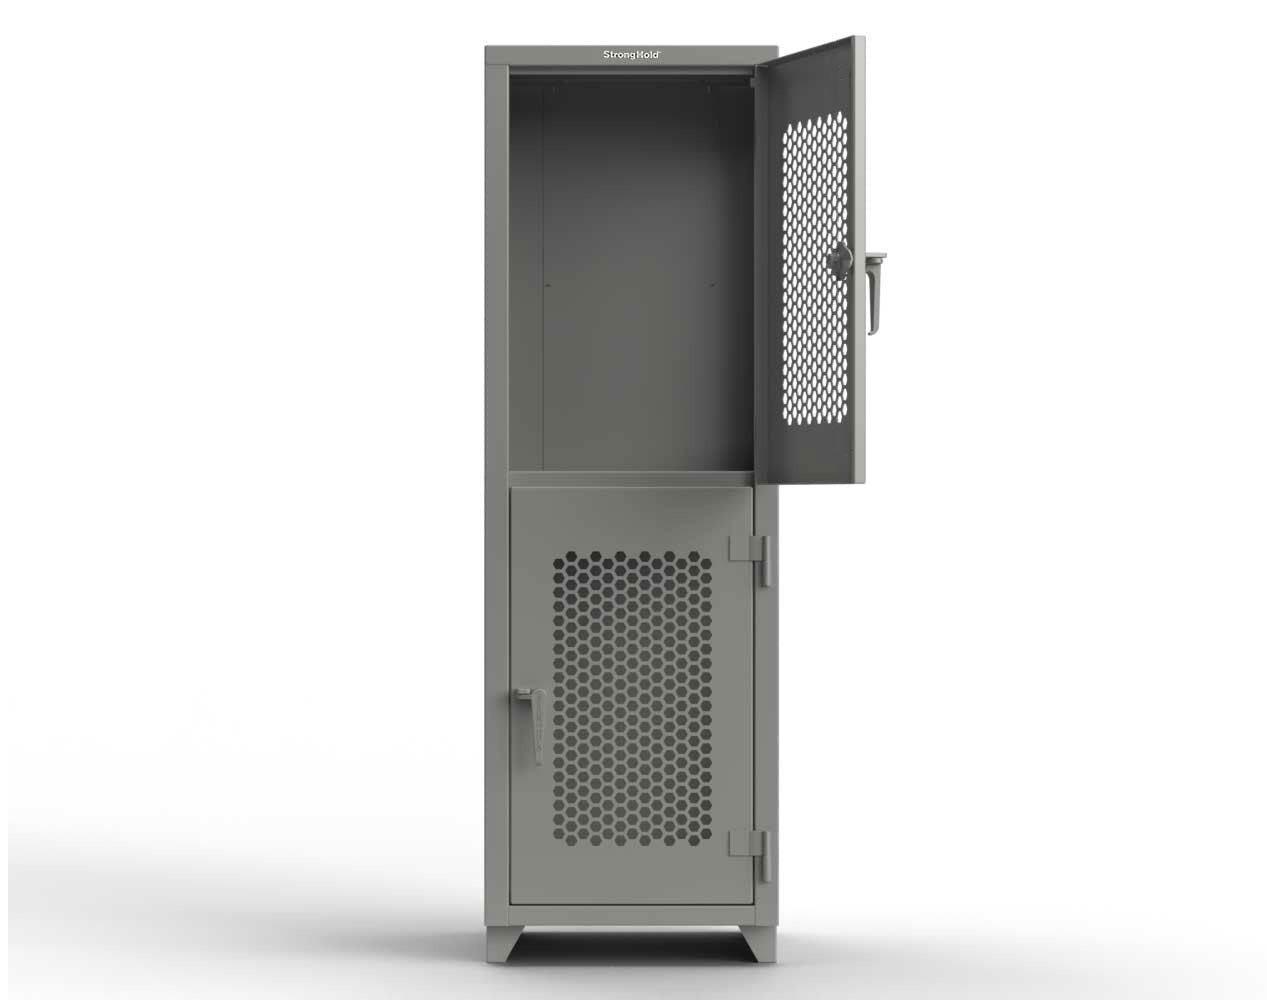 Extra Heavy Duty 14 GA Double-Tier Ventilated Locker, 2 Compartments - 24 in. W x 24 in. D x 75 in. H